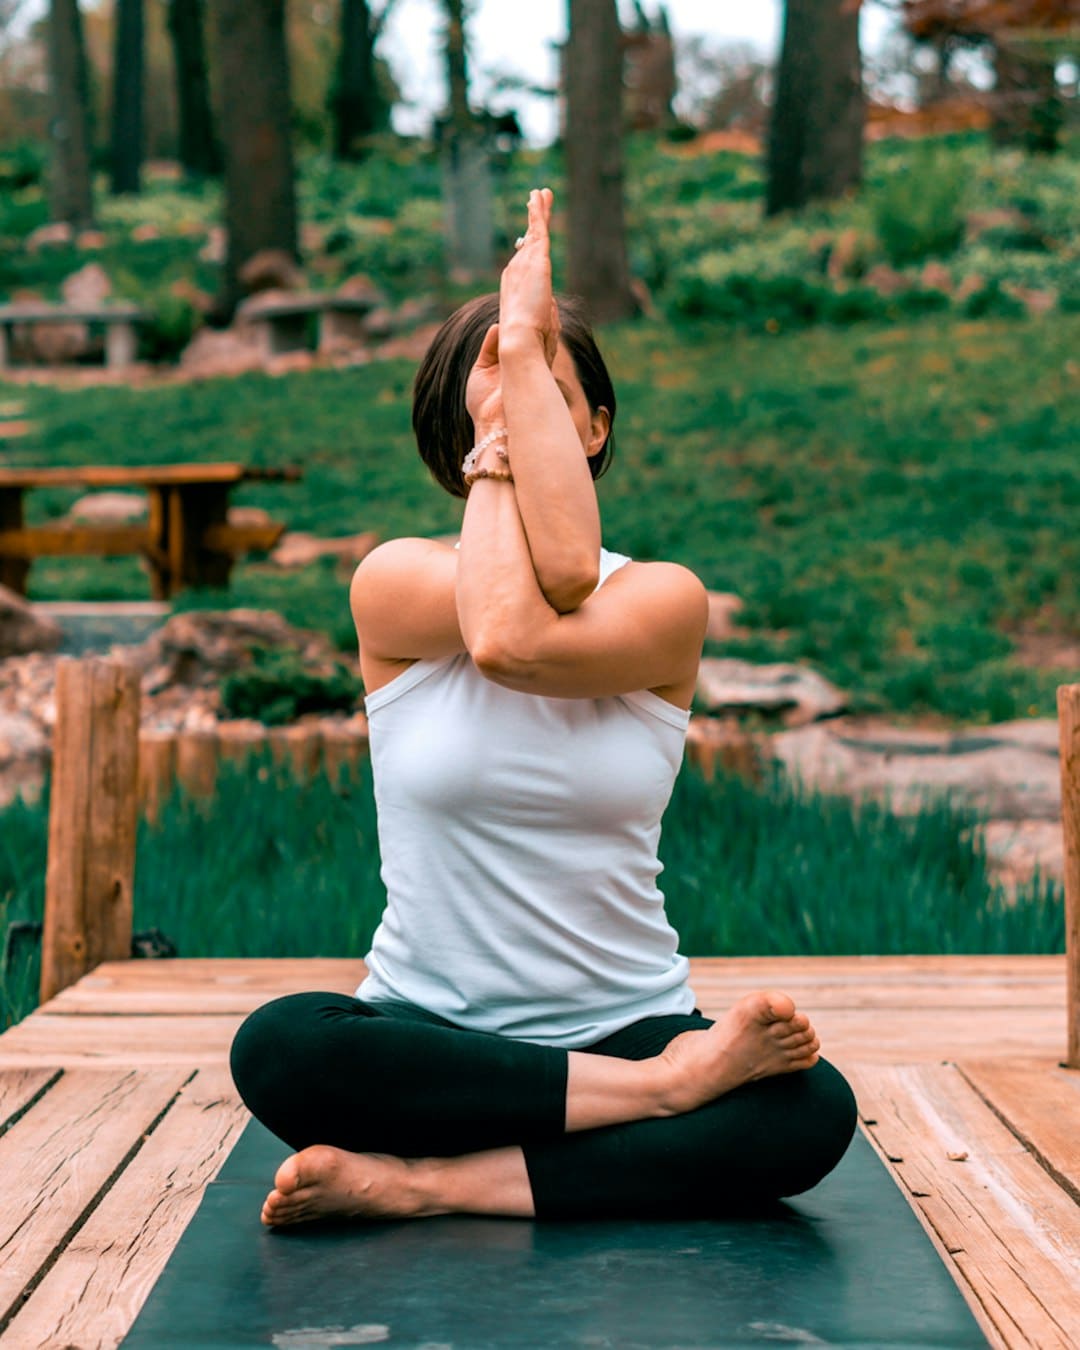 a lady doing yoga pose in open air